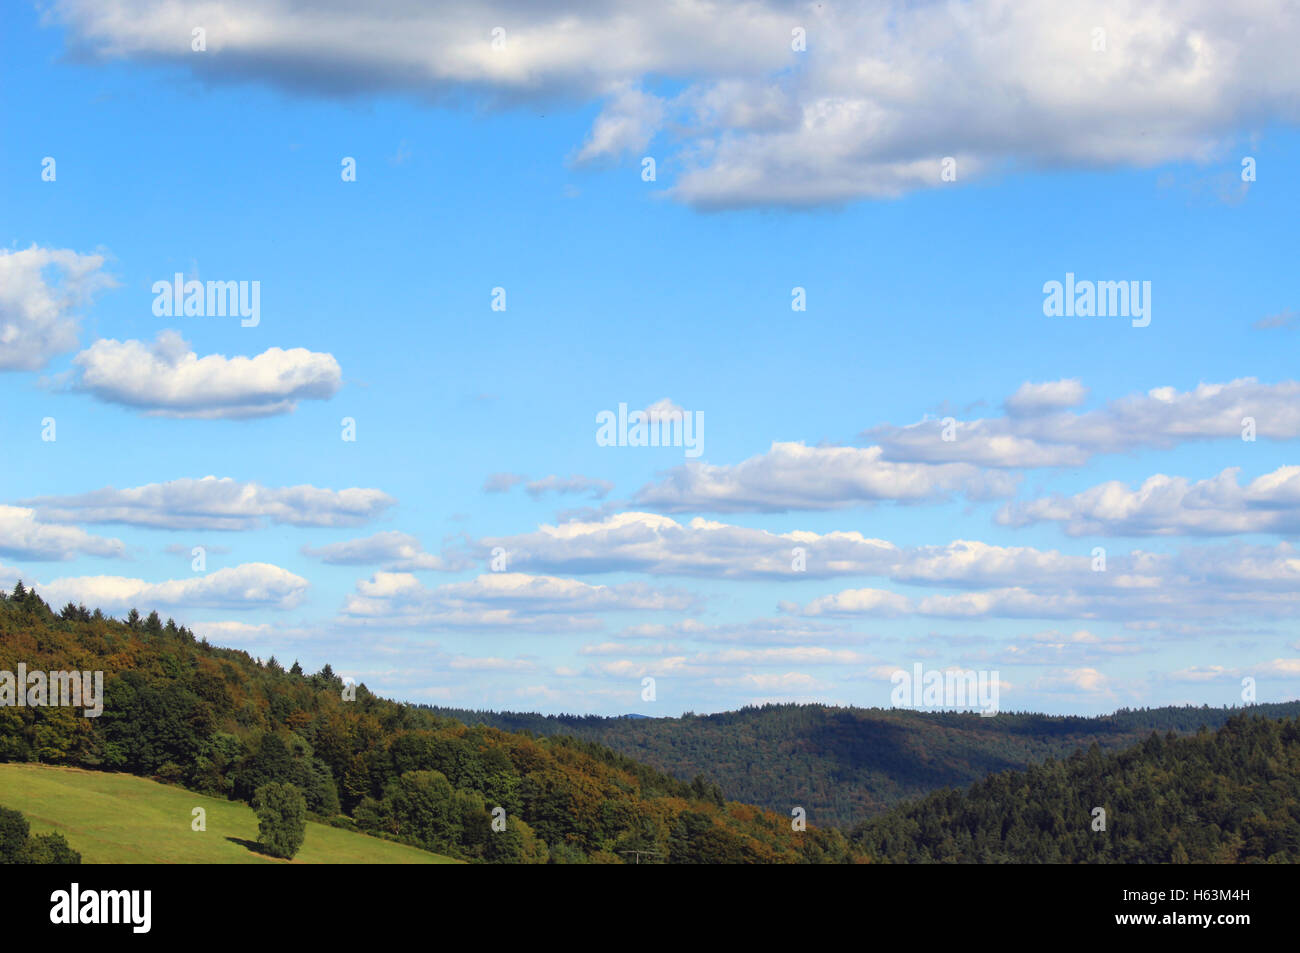 Landscape with wood, hills and sky with clohds Stock Photo